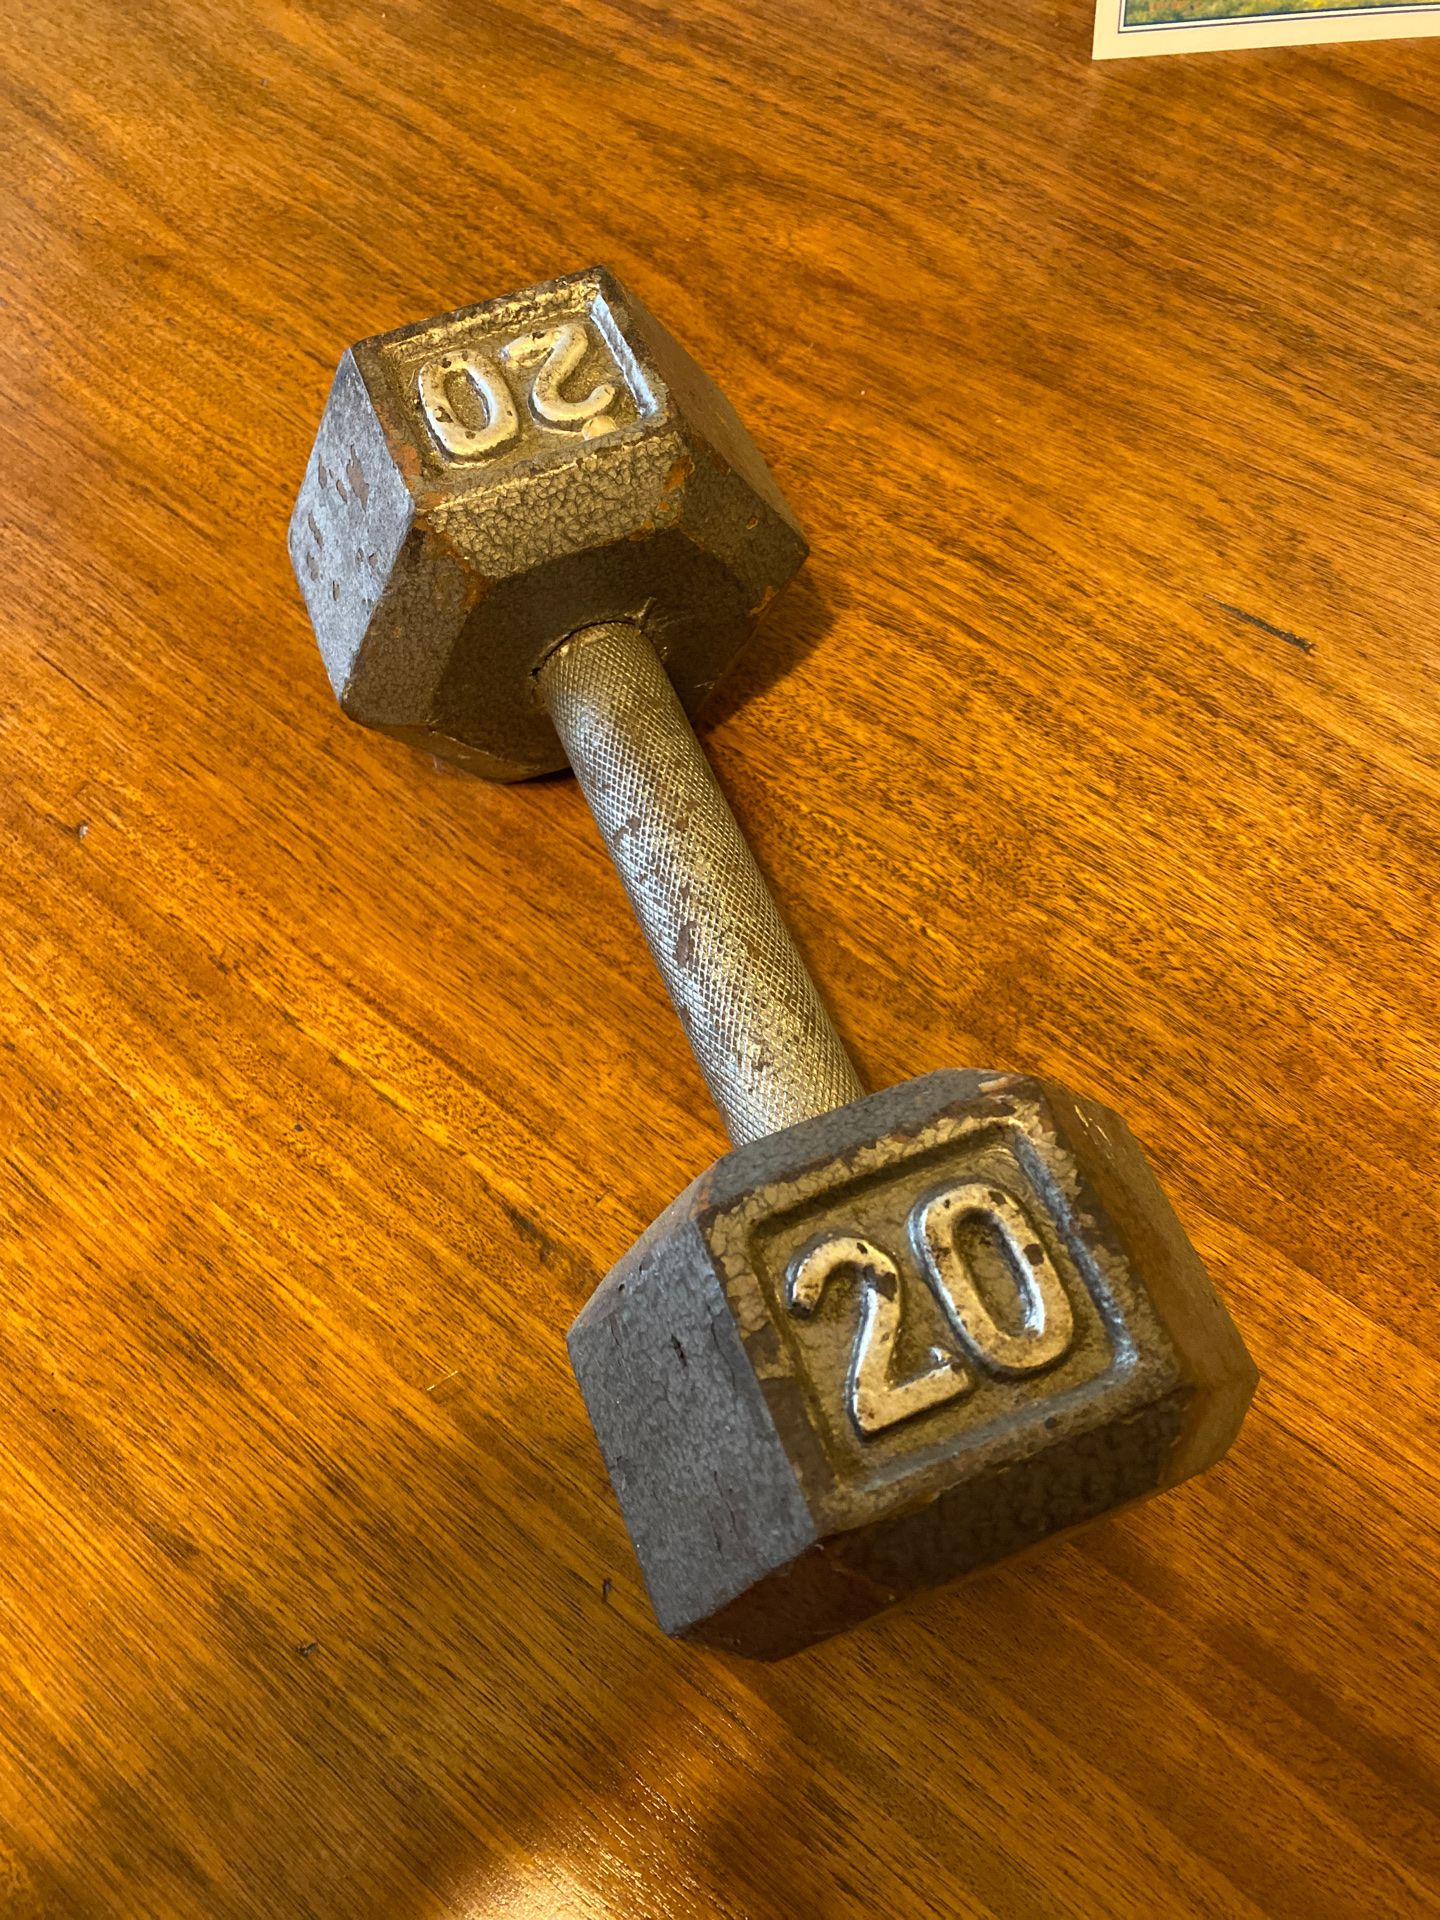 20lb weight dumbbell